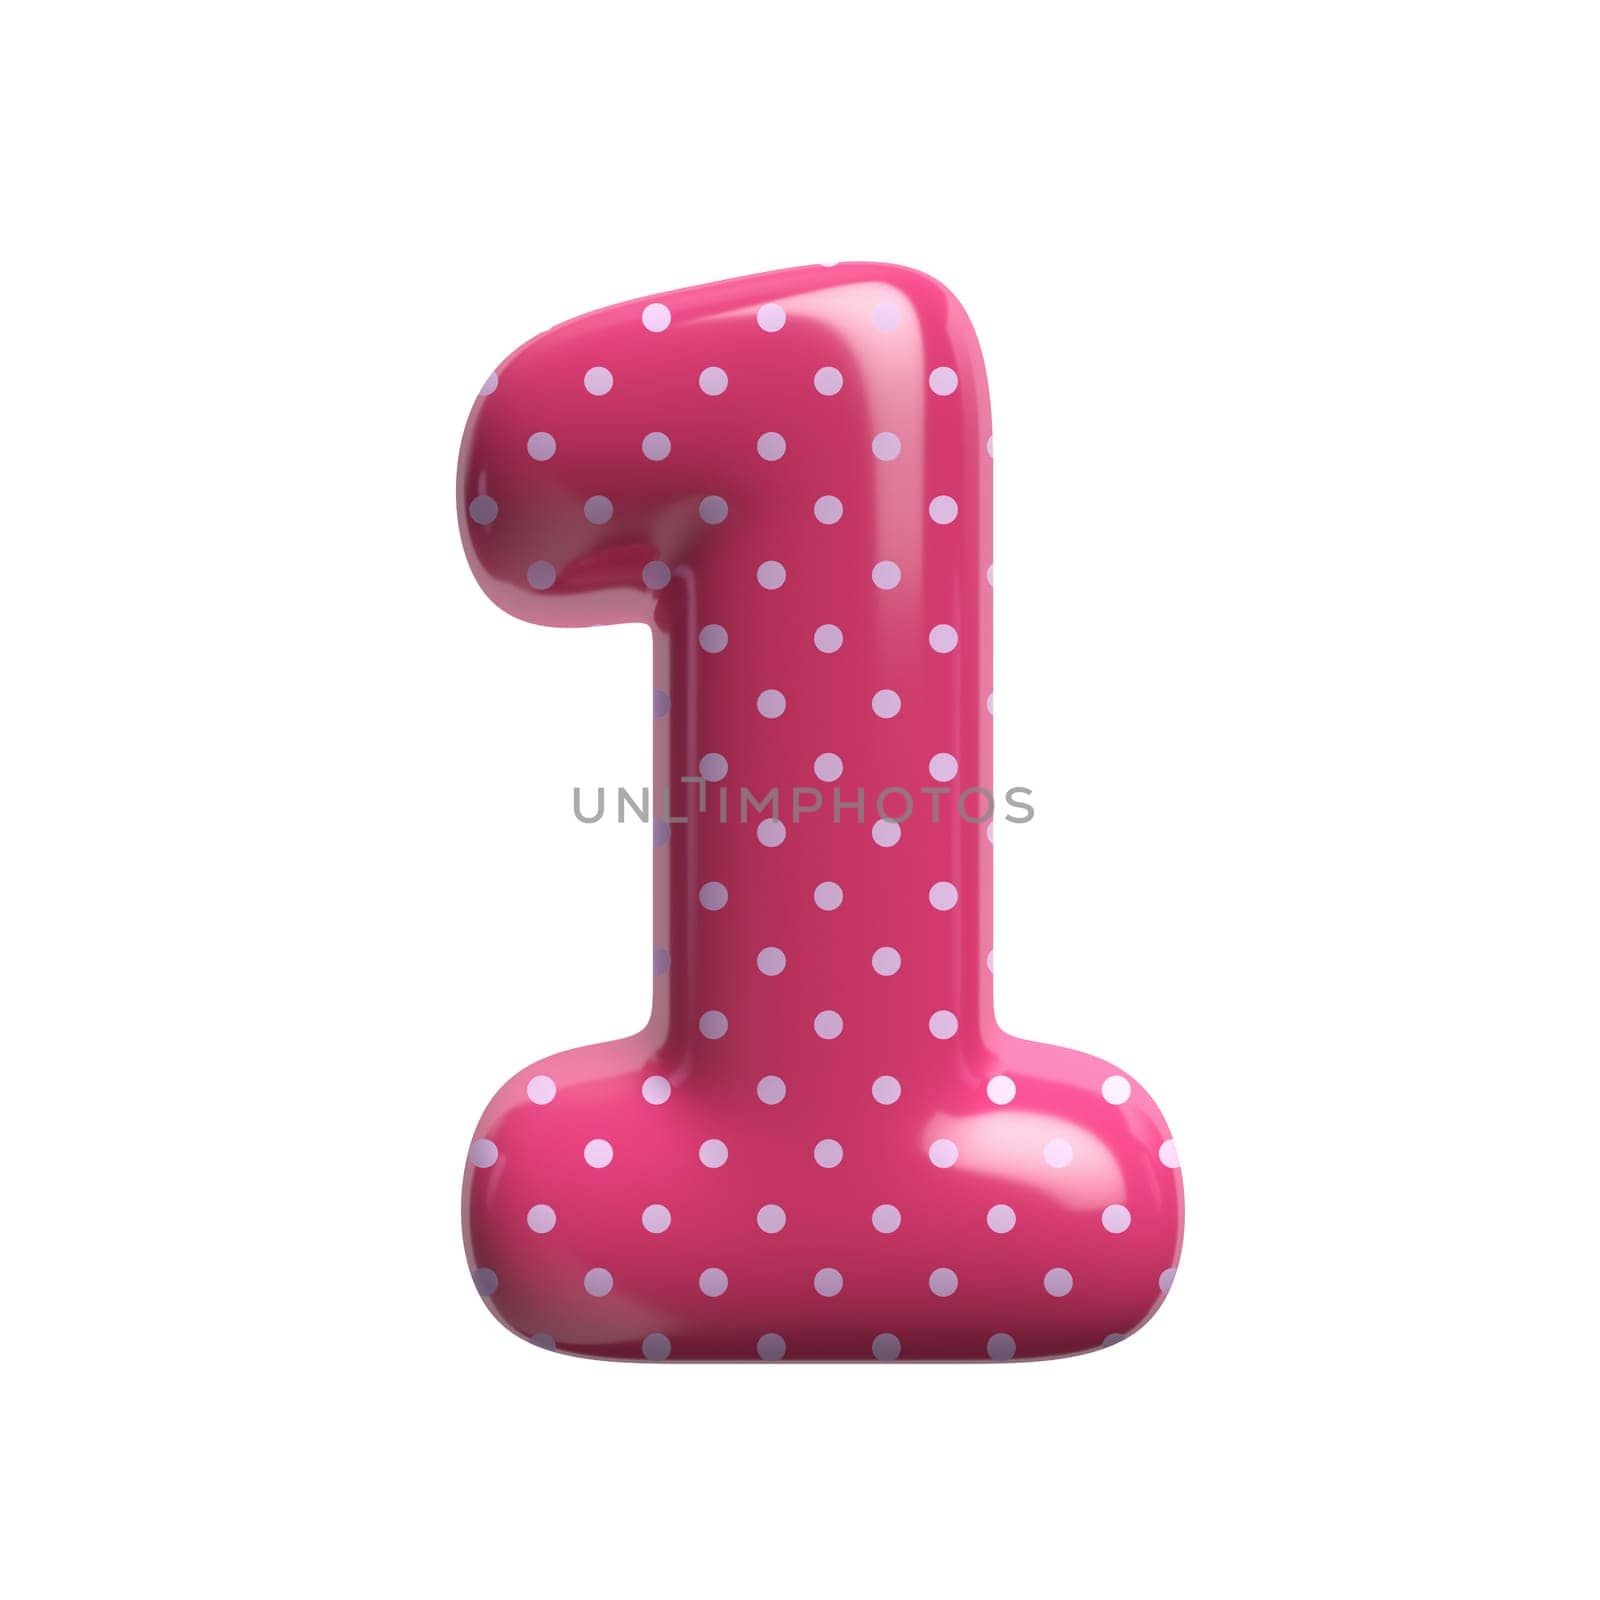 Polka dot number 1 - 3d pink retro digit - Suitable for Fashion, retro design or decoration related subjects by chrisroll